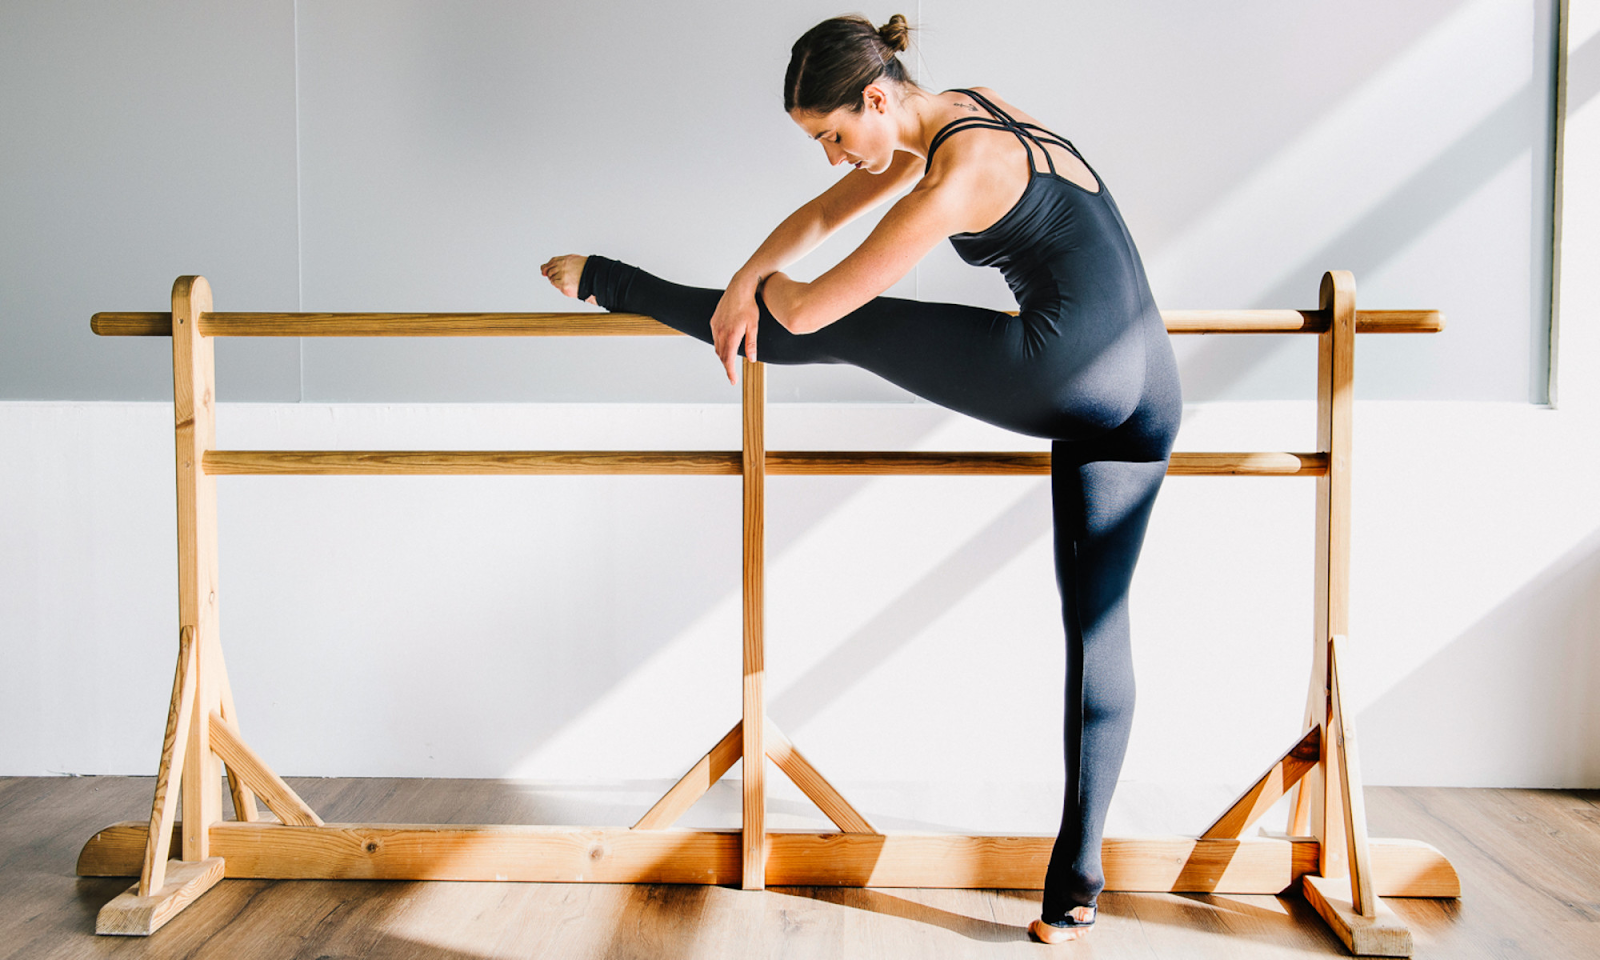 Ballet Stretches You Have to Try - Barre Hamstring Stretches